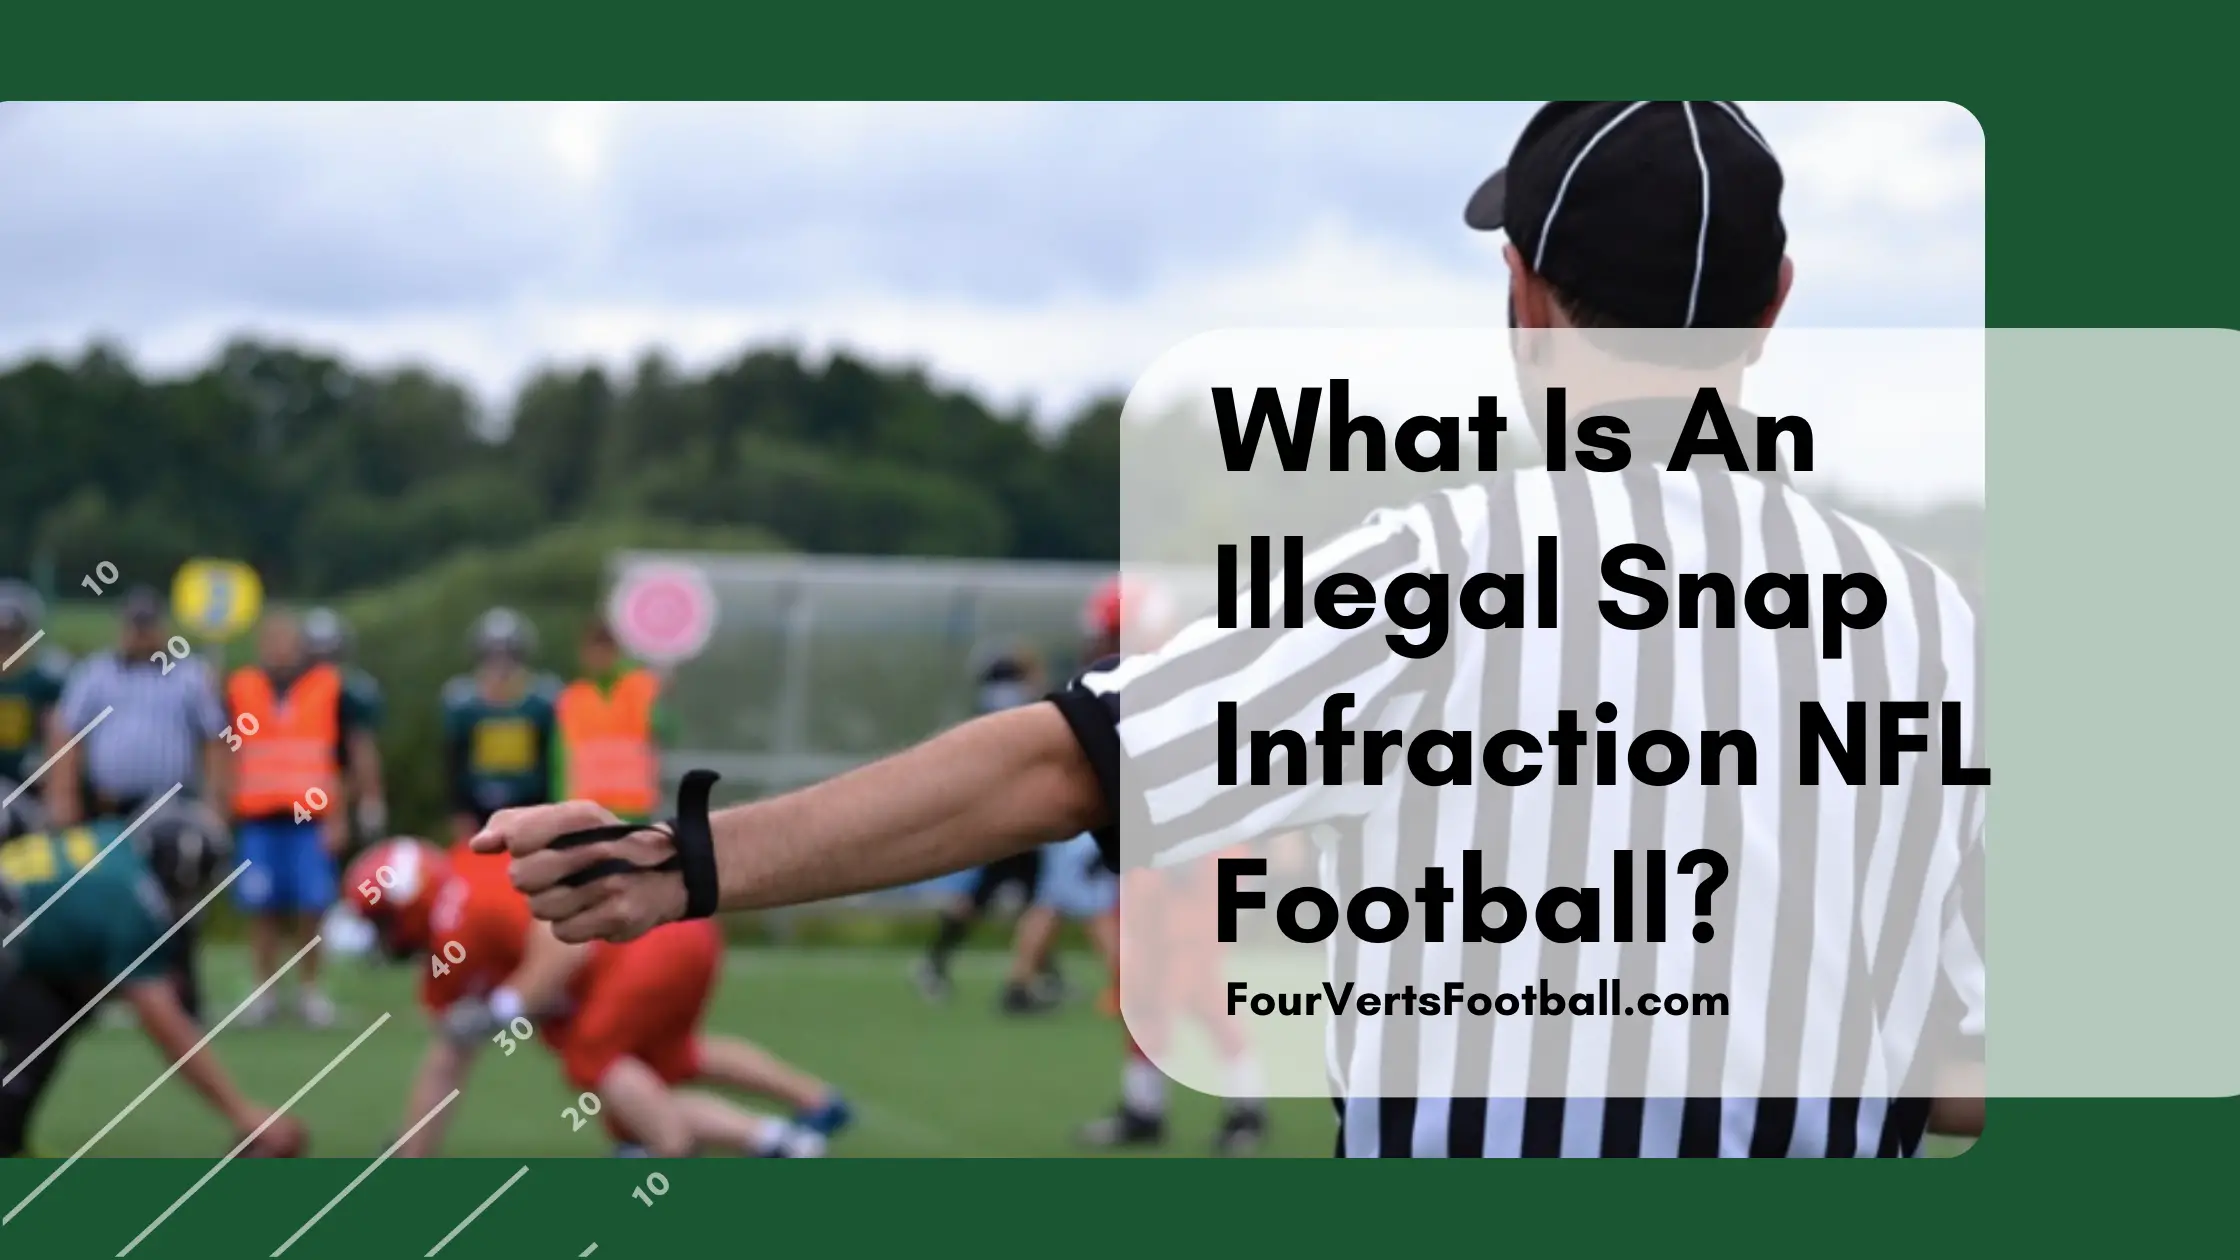 What Is An Illegal Snap Infraction NFL Football?